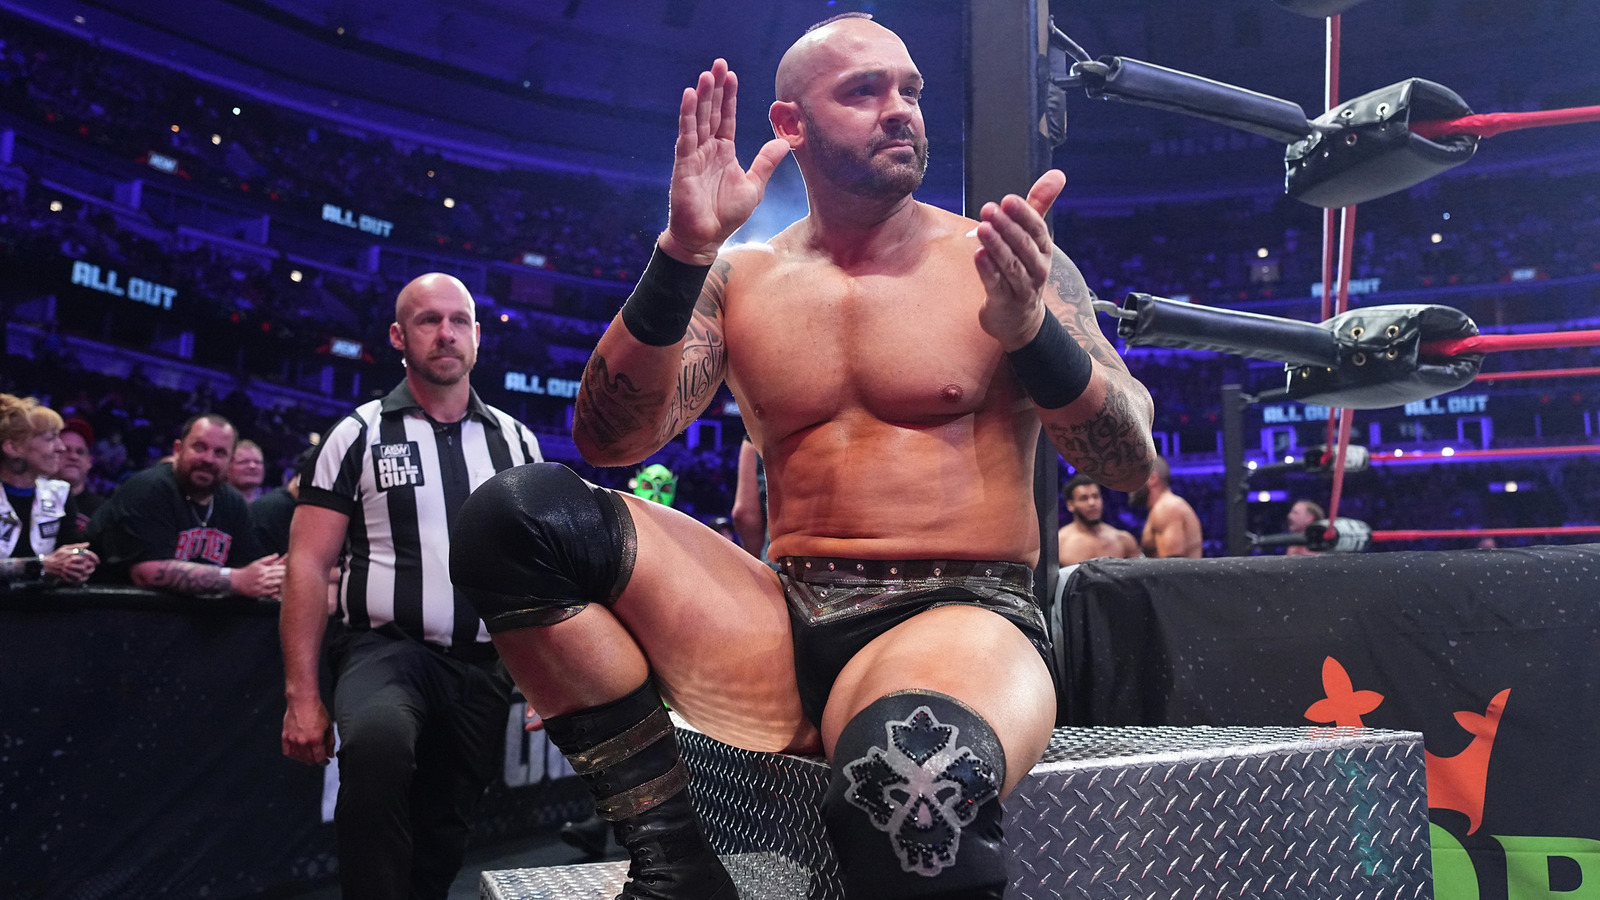 Backstage Update On Shawn Spears' AEW Departure